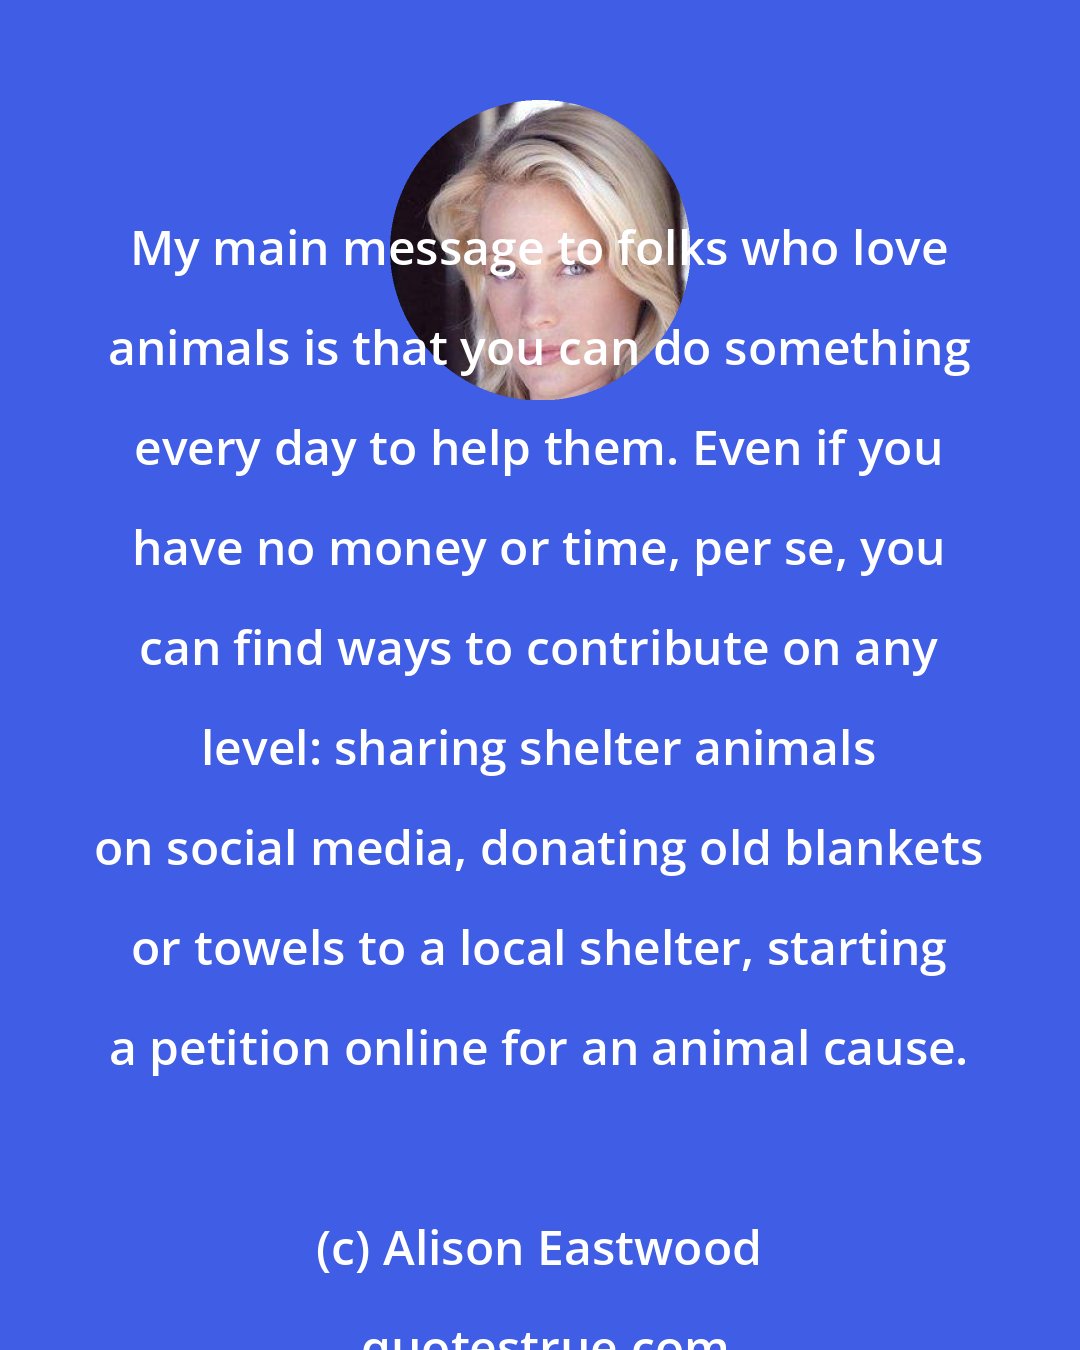 Alison Eastwood: My main message to folks who love animals is that you can do something every day to help them. Even if you have no money or time, per se, you can find ways to contribute on any level: sharing shelter animals on social media, donating old blankets or towels to a local shelter, starting a petition online for an animal cause.